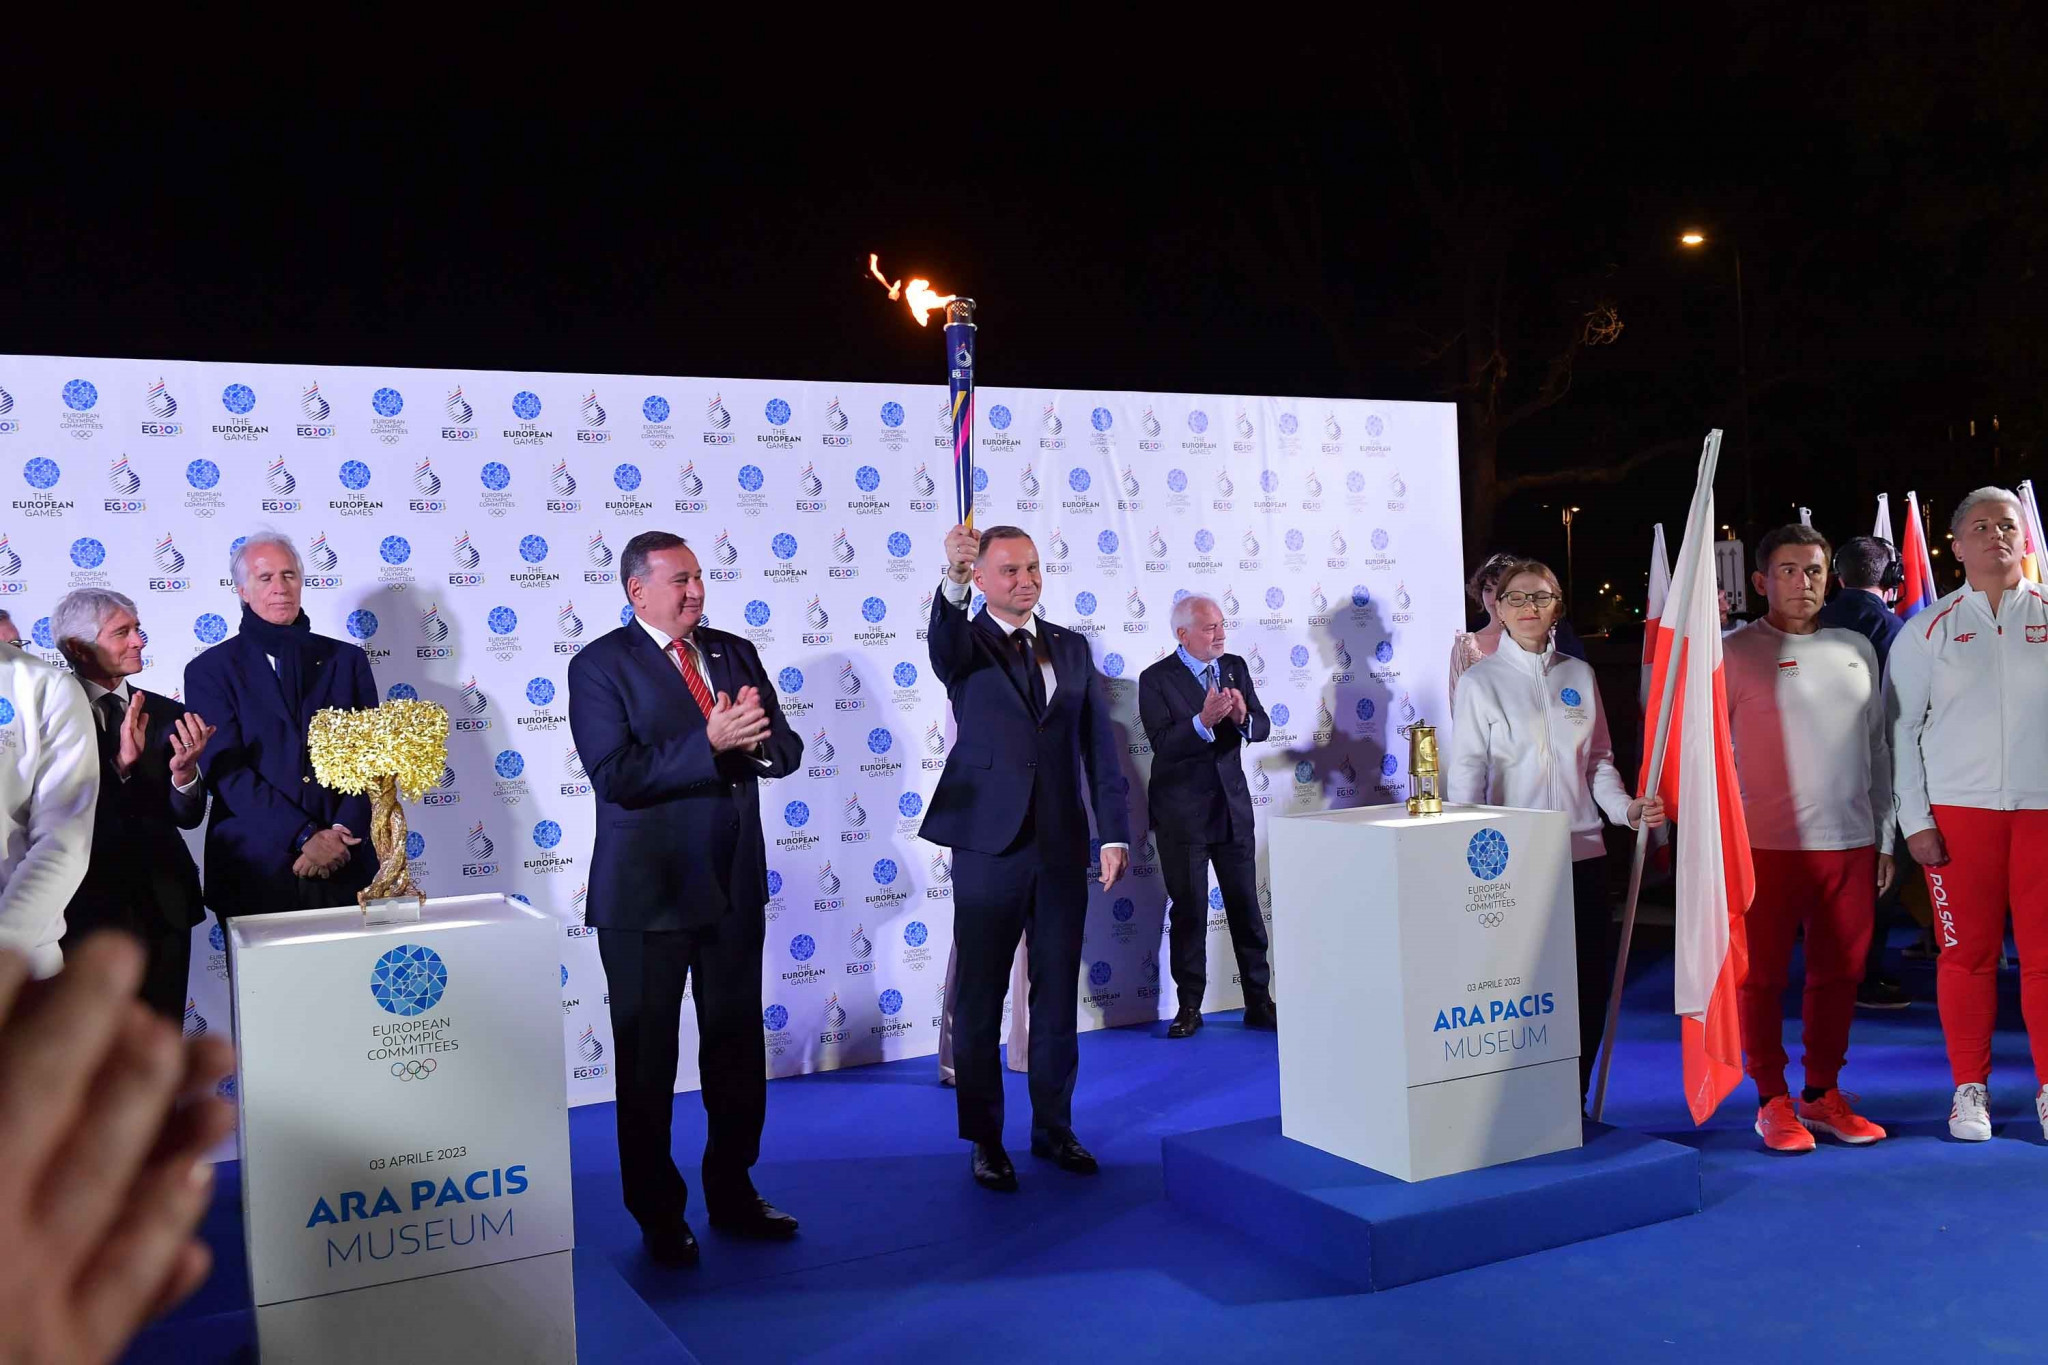 Poland’s President Andrzej Duda holds aloft the Flame of Peace at the handover ceremony in Rome ©EOC